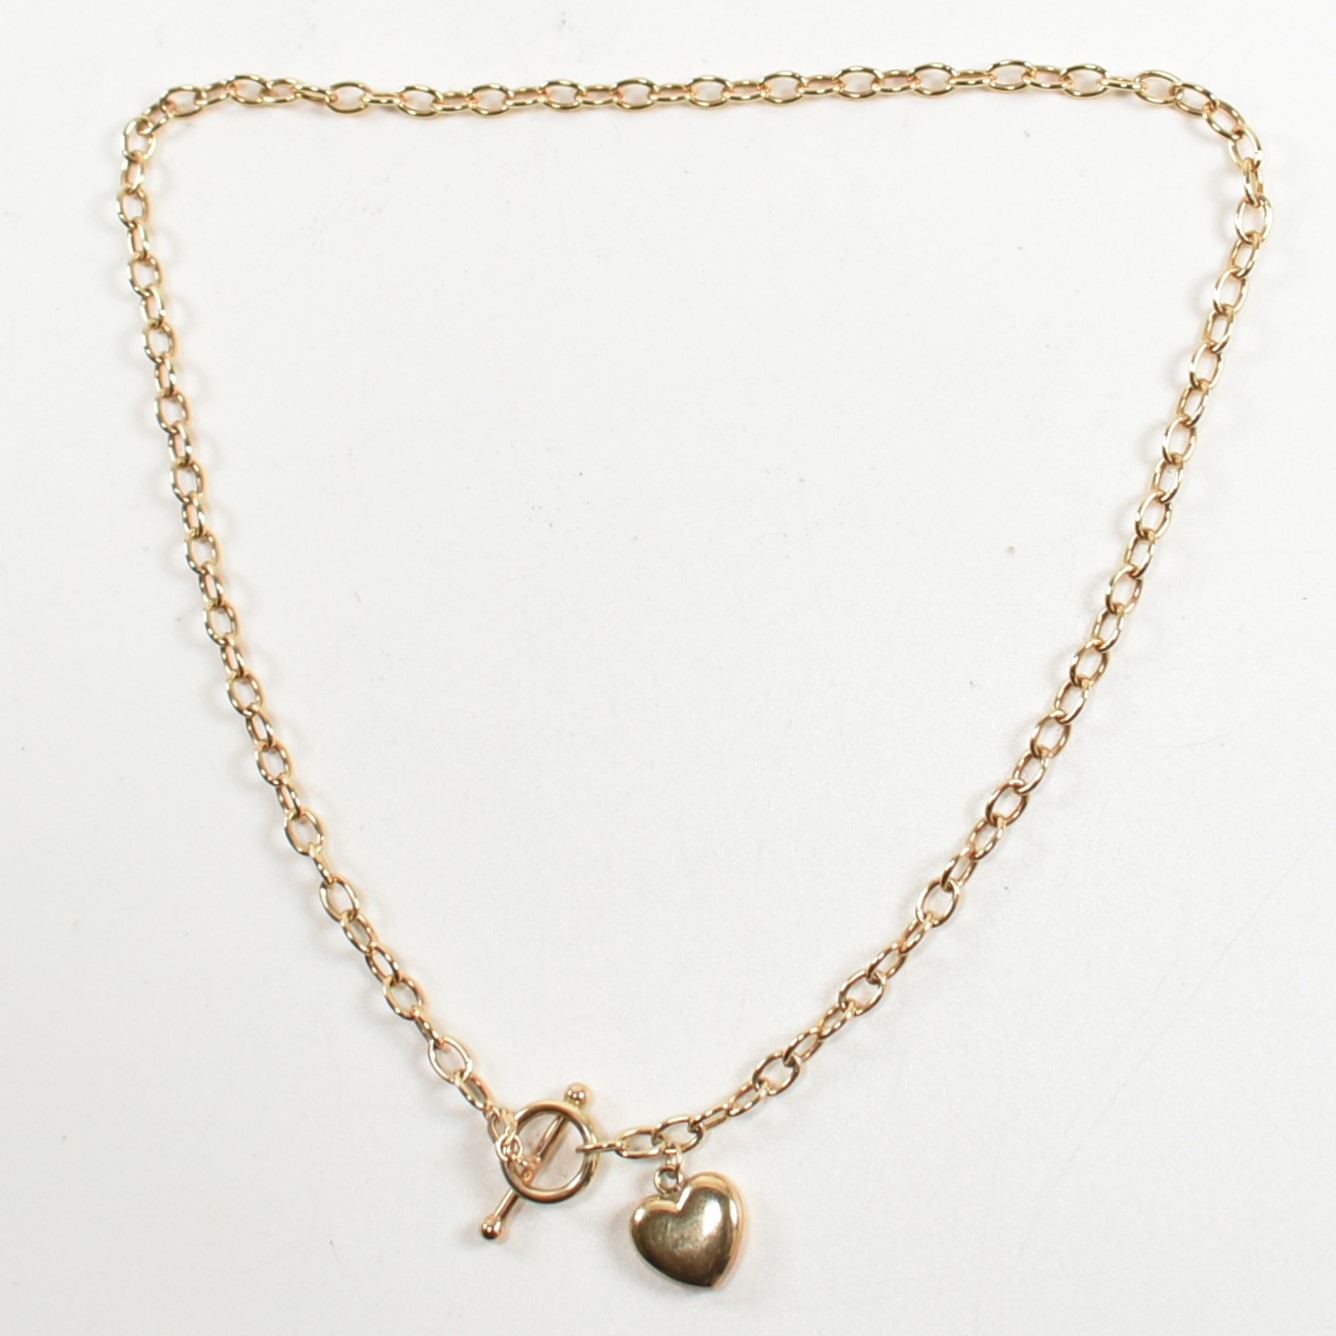 HALLMARKED 9CT GOLD T-BAR NECKLACE WITH HEART PENDANT - Image 3 of 5